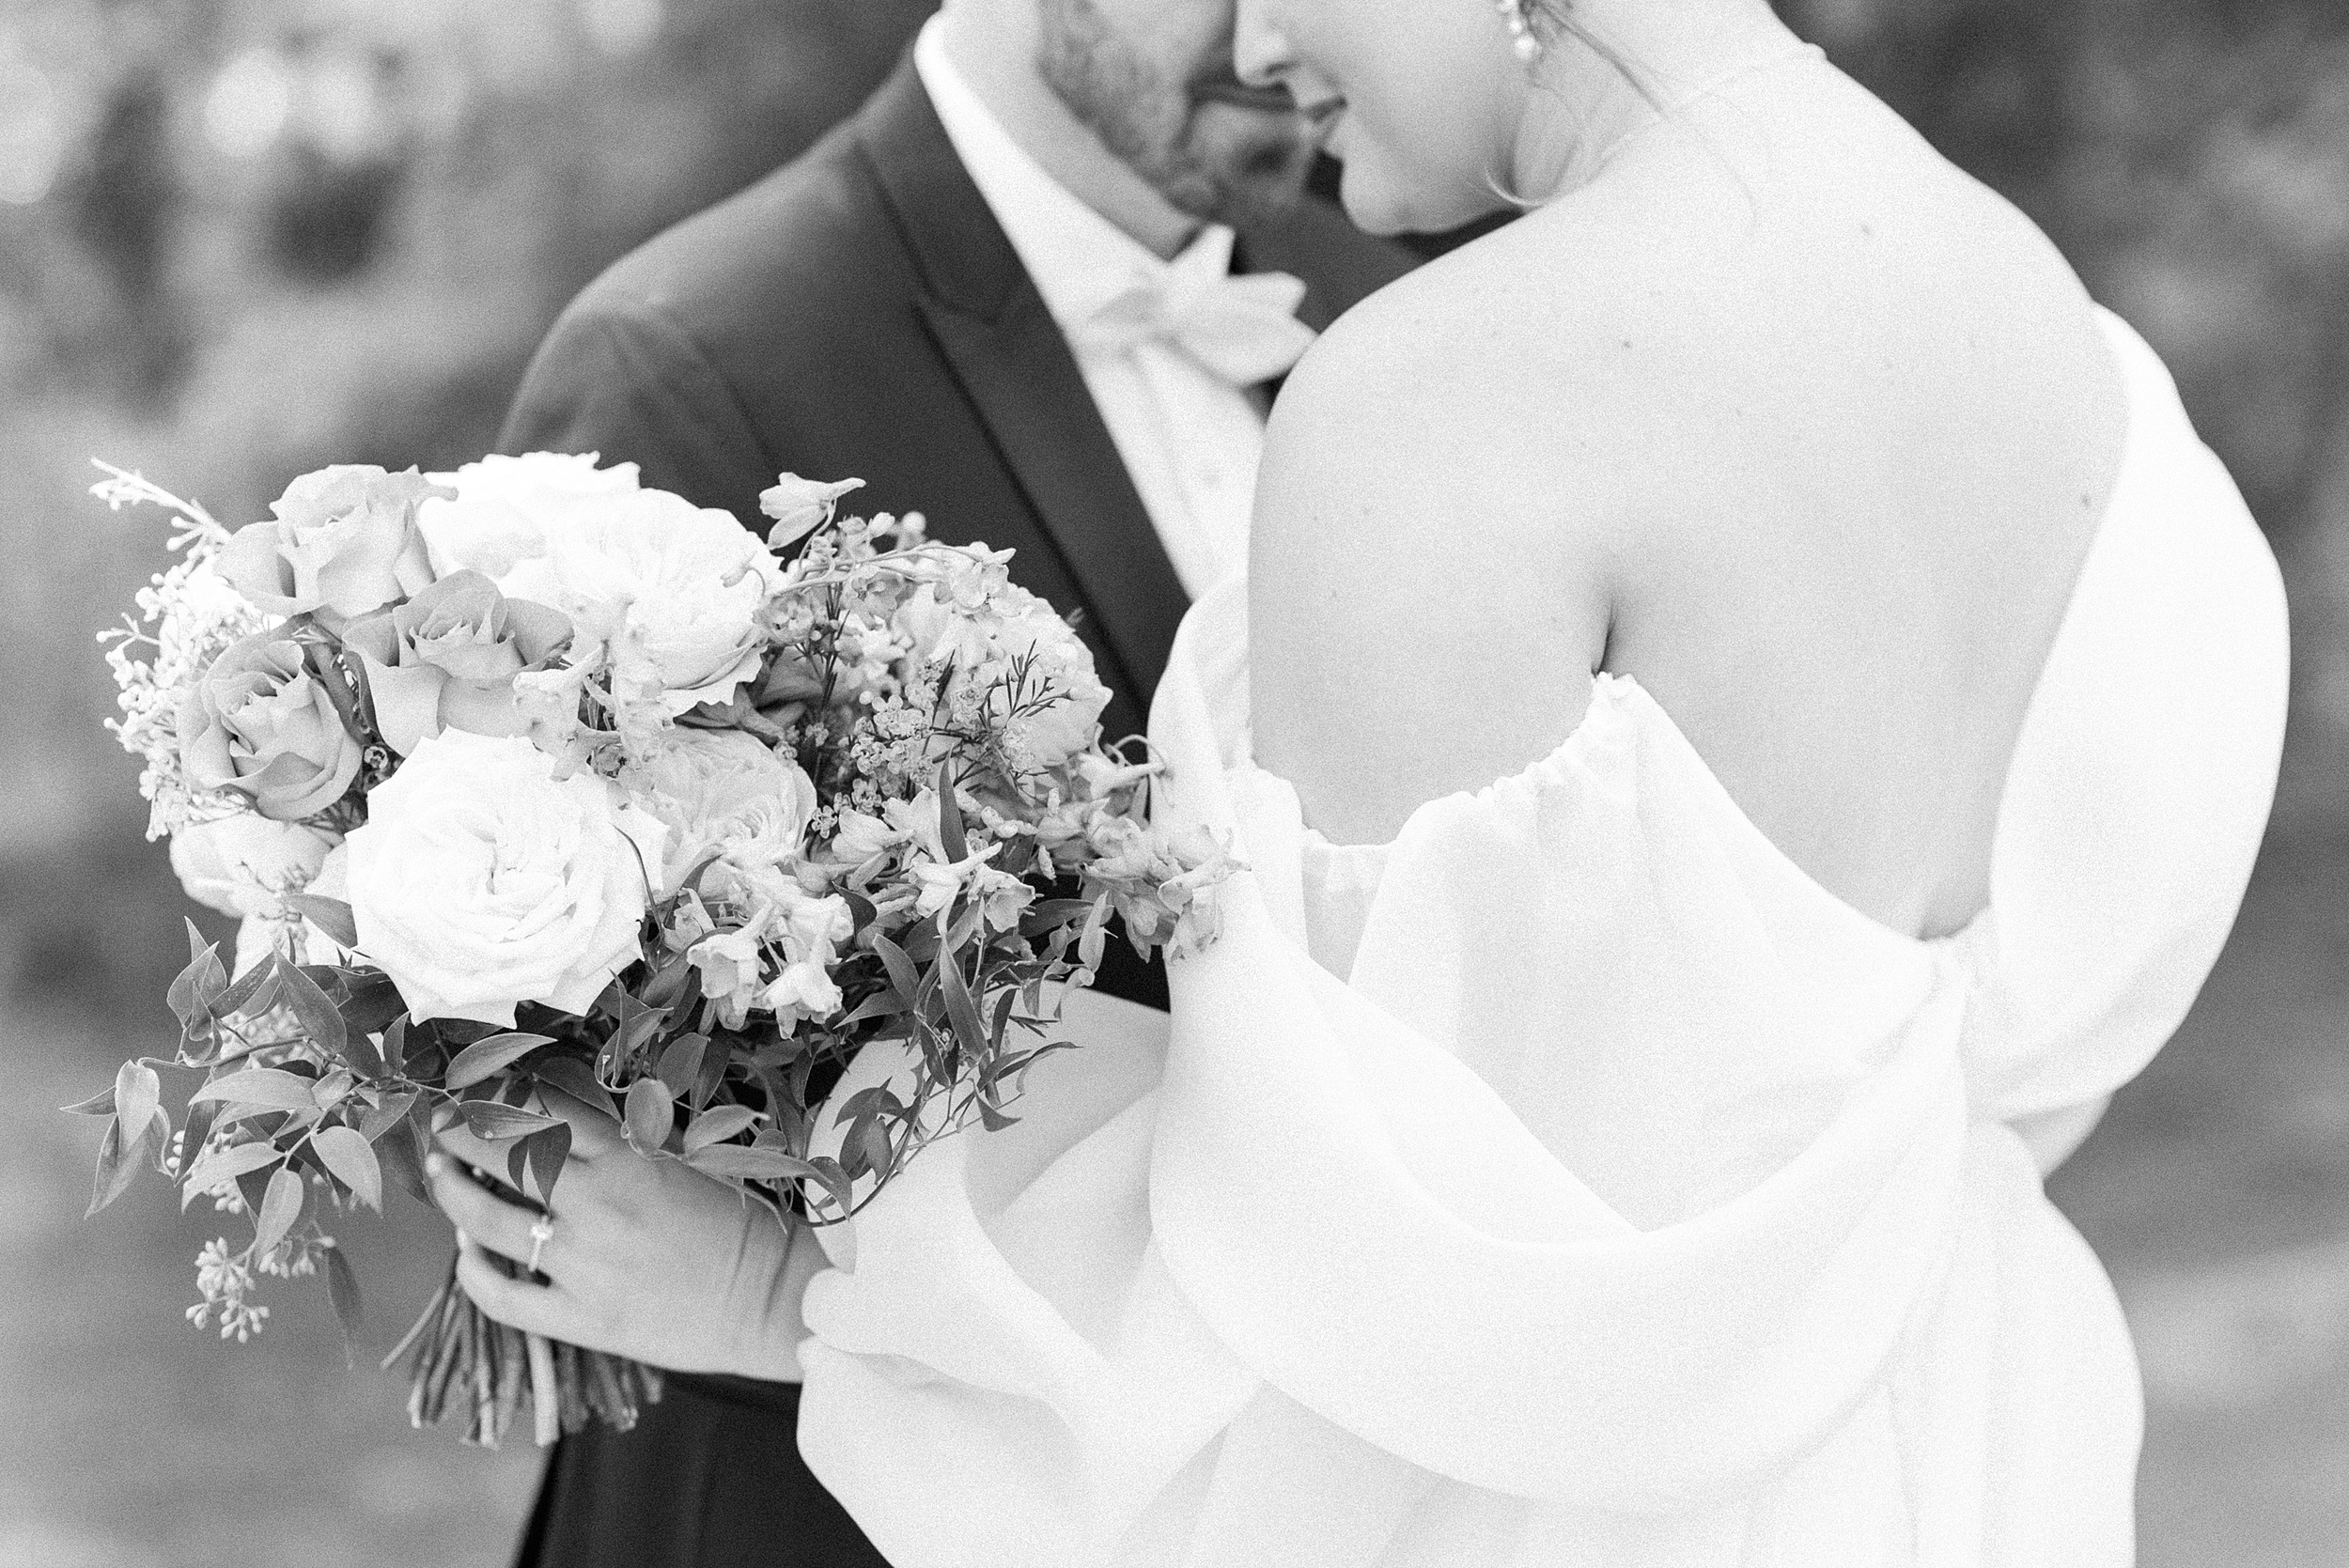 Details of newlyweds snuggling while holding a bouquet outside